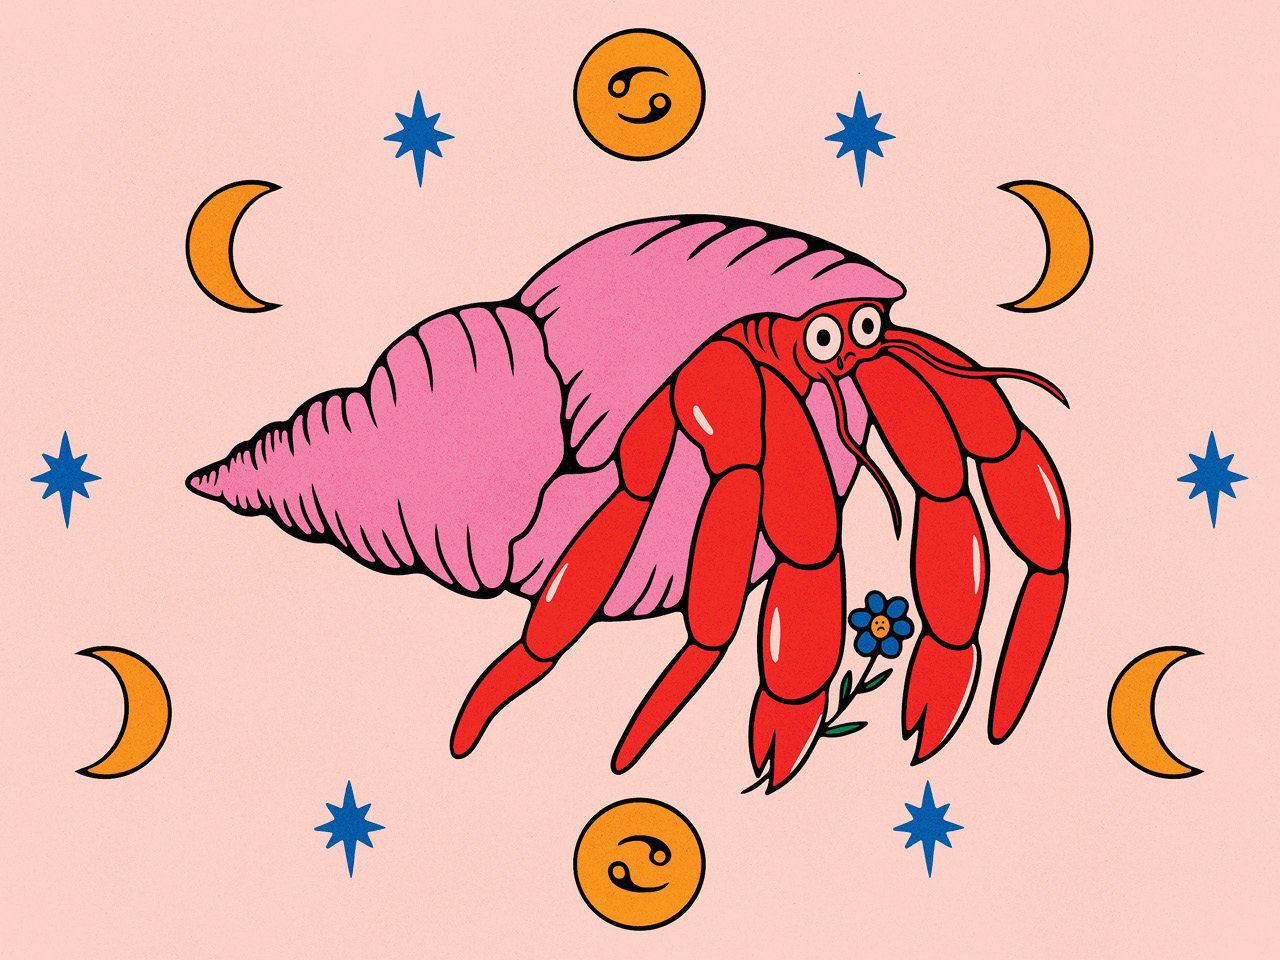 An illustration of a hermit crab with a pink shell. The hermit crab has a tear falling from their eye and is holding a flower who also has a frowny face on it. The cancer symbol is shown in circles above and below the crab.